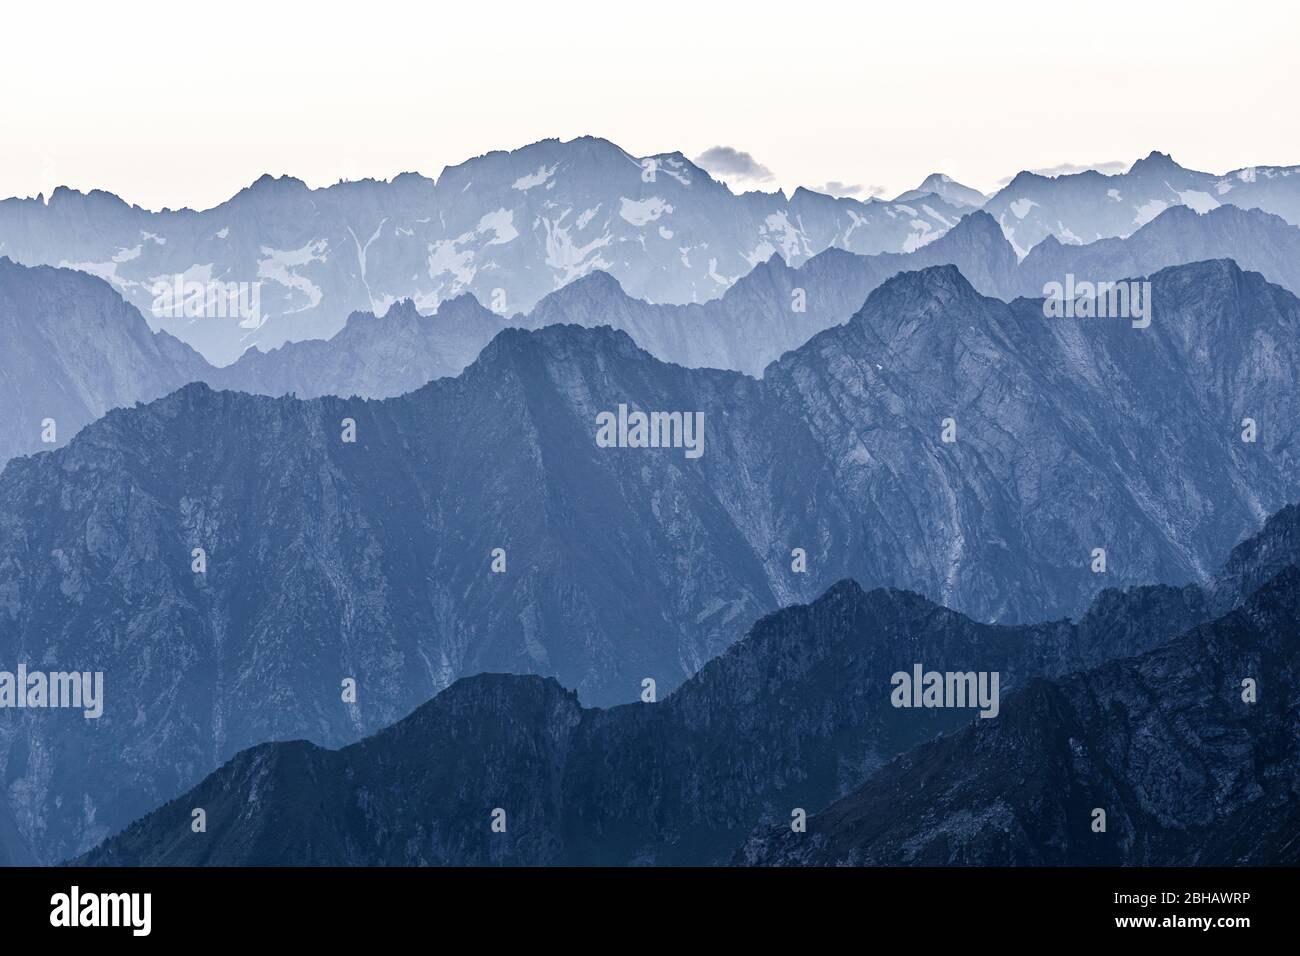 Zillertaler alps, layers of mountain ranges in the morning, Ginzling, Schwaz district, Tyrol, Austria Stock Photo